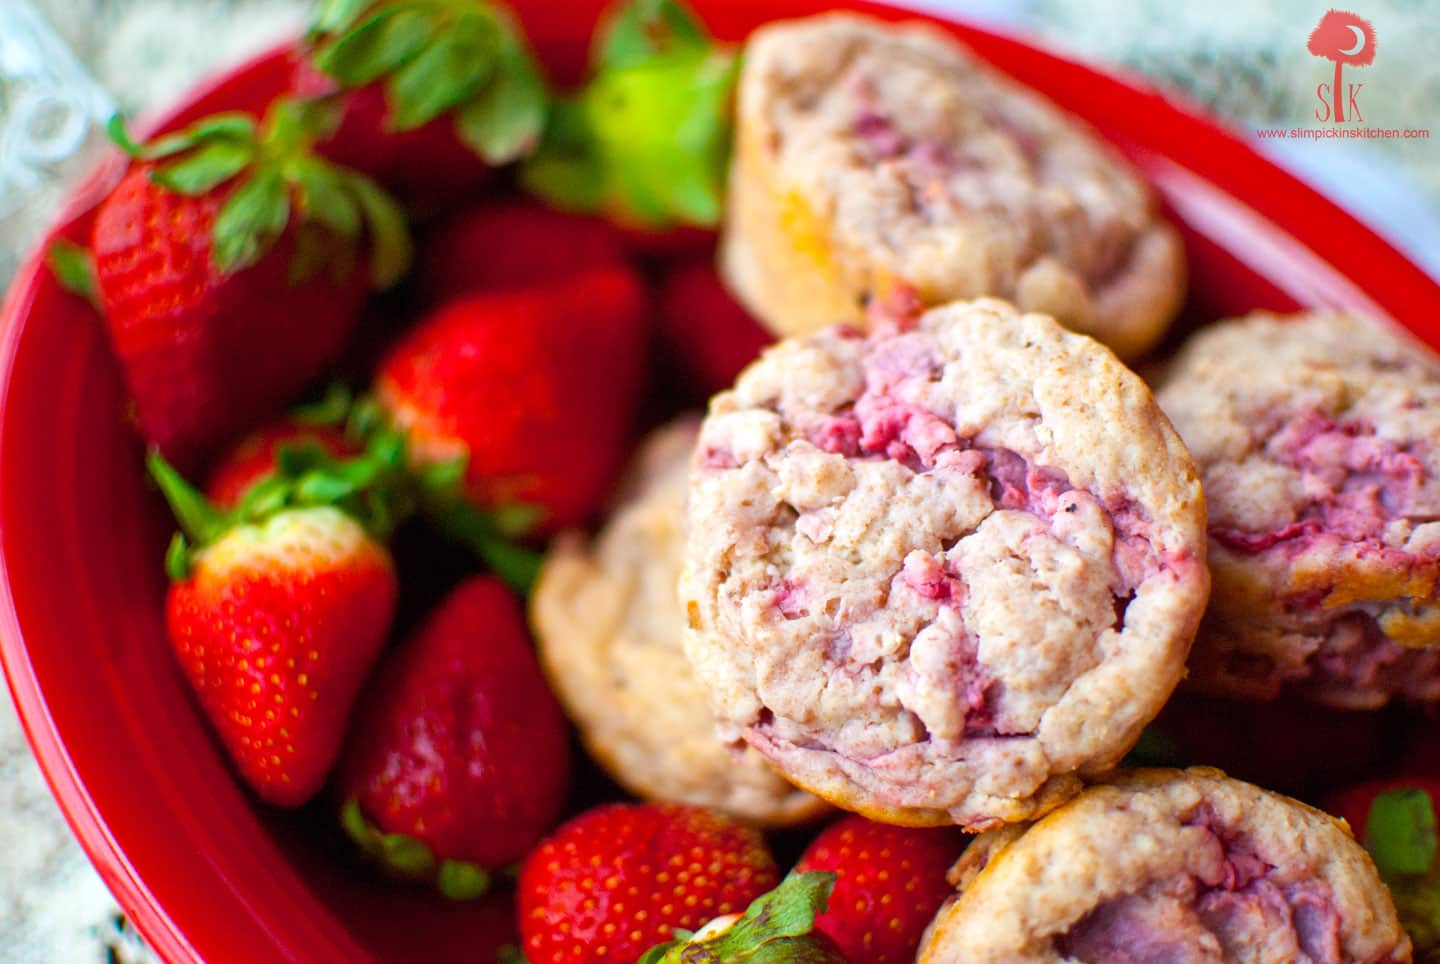 Looking for a healthy dessert recipe for Valentine's day? Try these 9 decadent recipes including a delicious strawberry love muffin recipe.